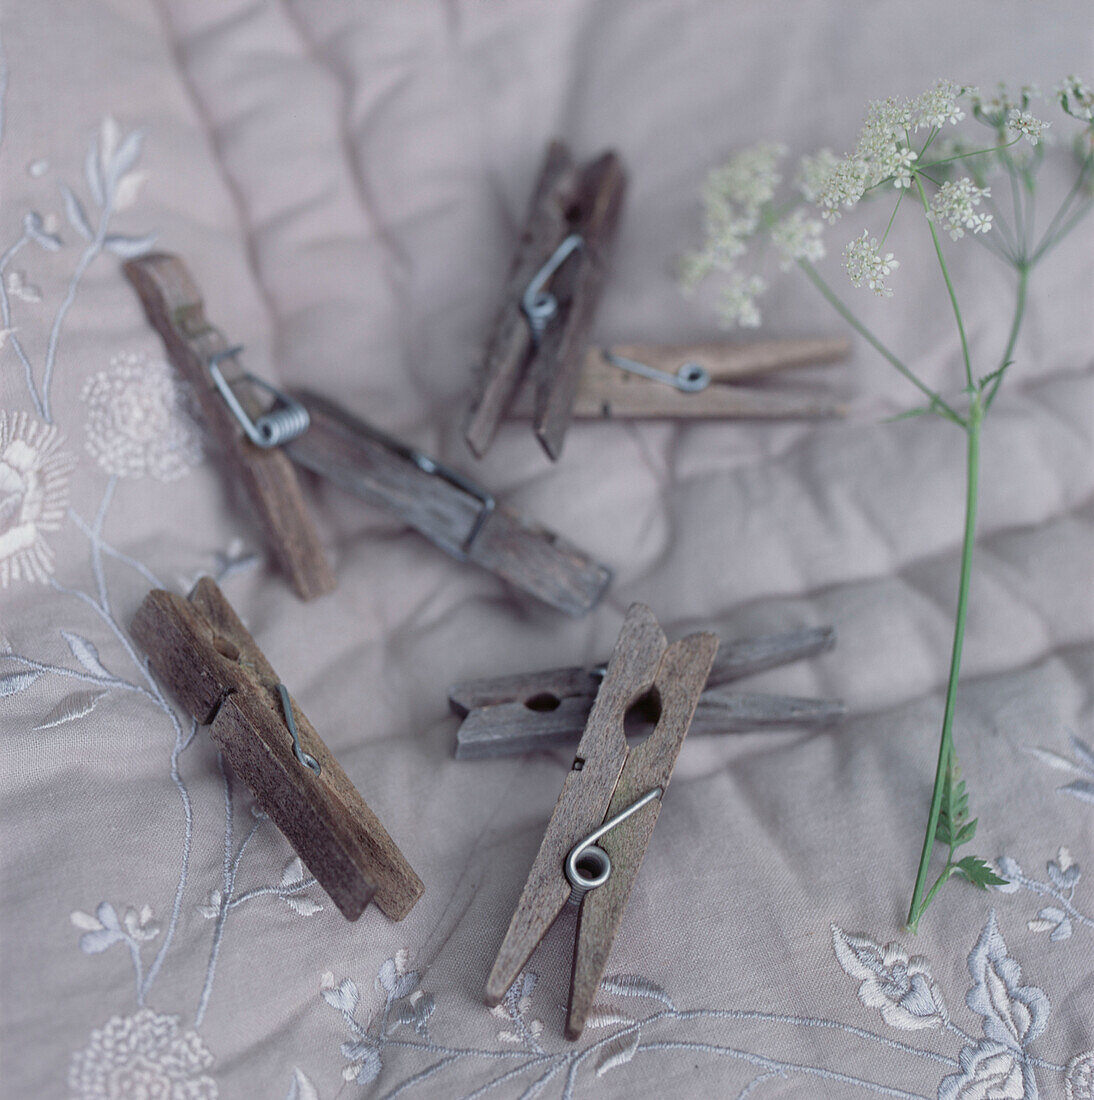 Detail of wooden clothes pegs on an embroidered fabric